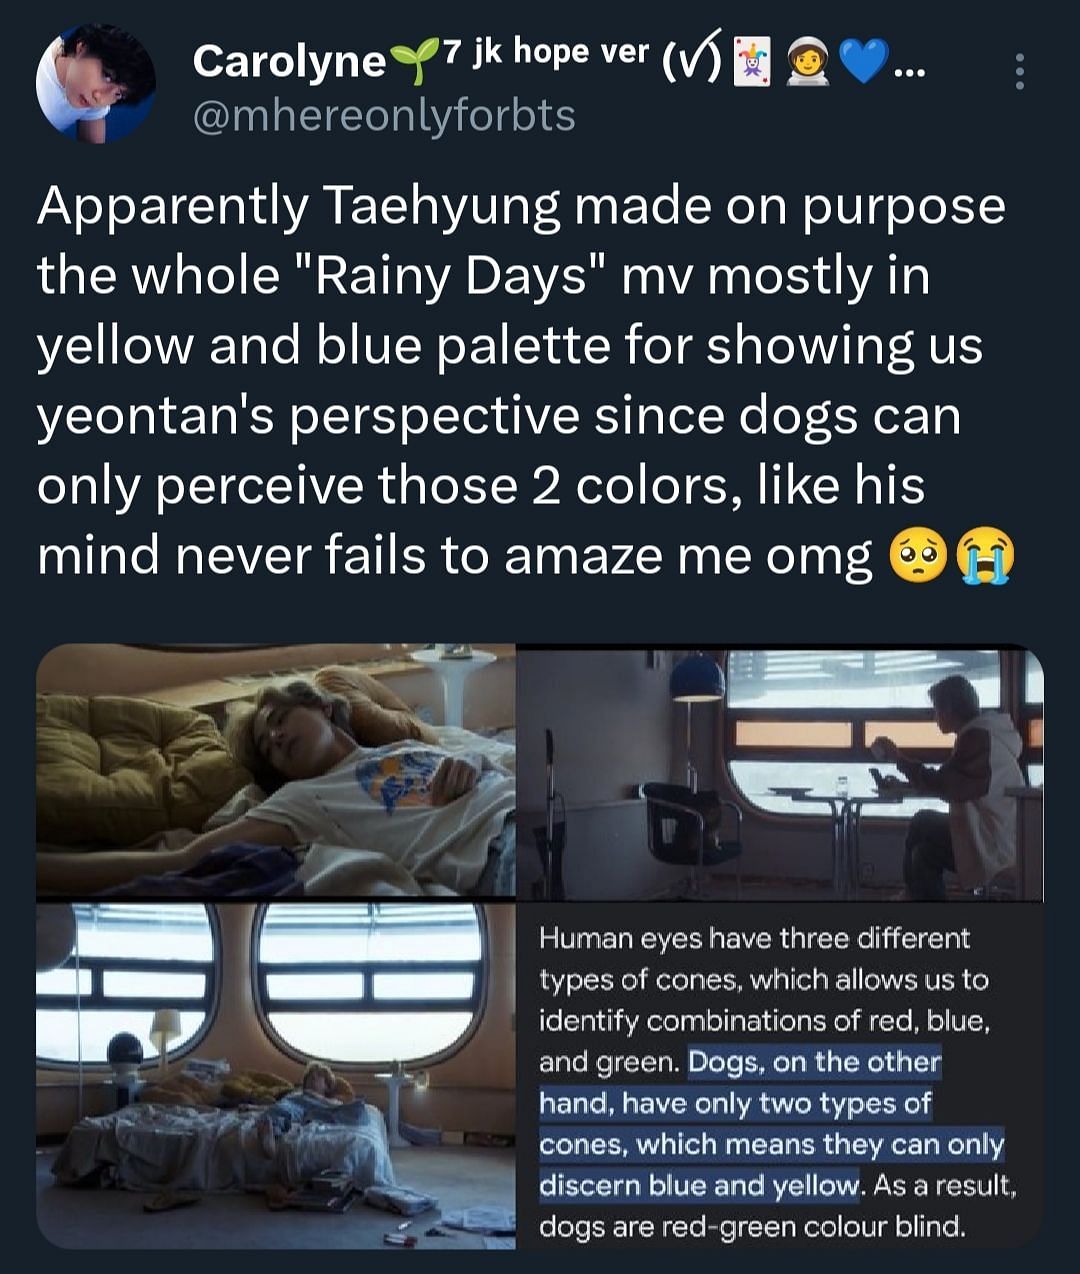 I'm Crying: ARMYs emotional as they speculate BTS' Kim Tae